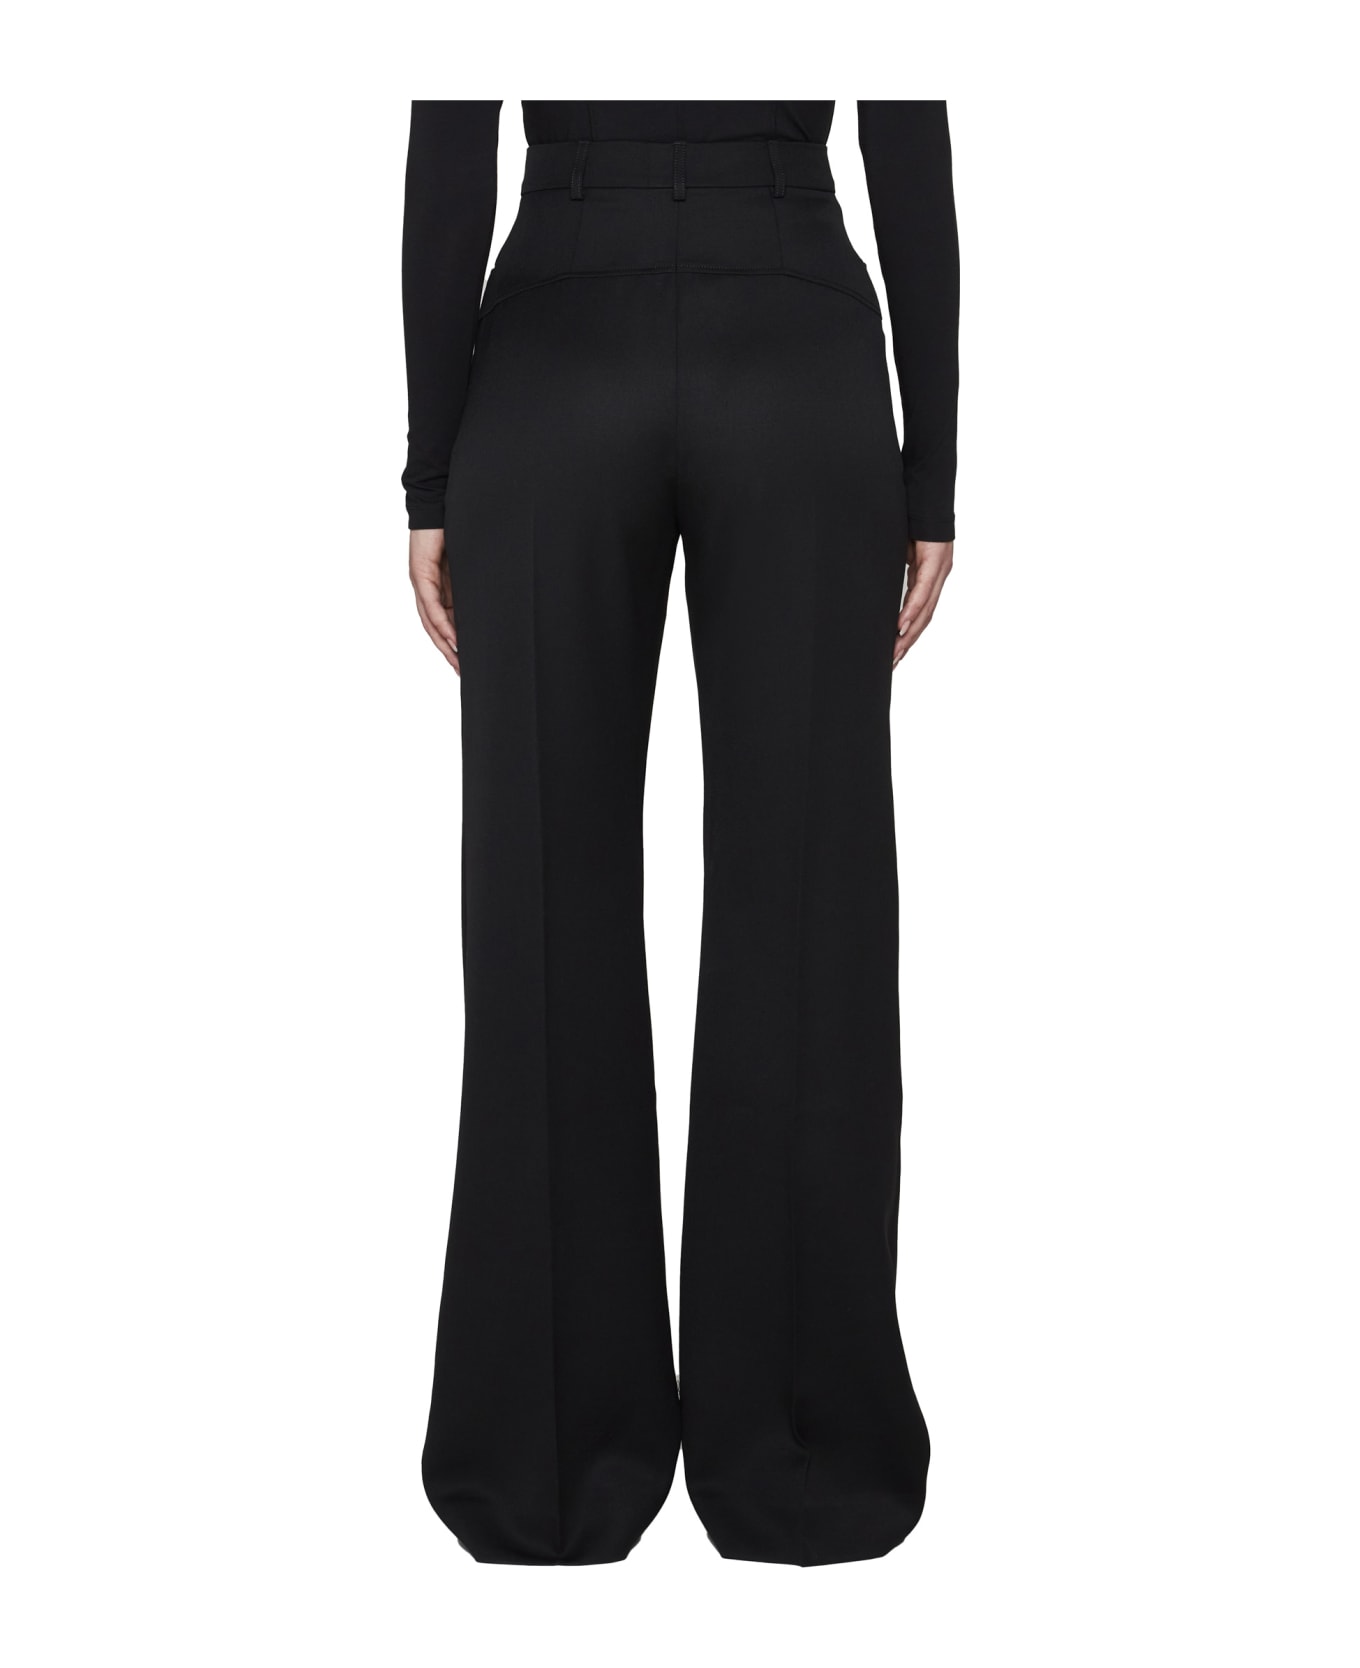 Jacquemus 'sauge' Pleat-front Trousers - Black ボトムス